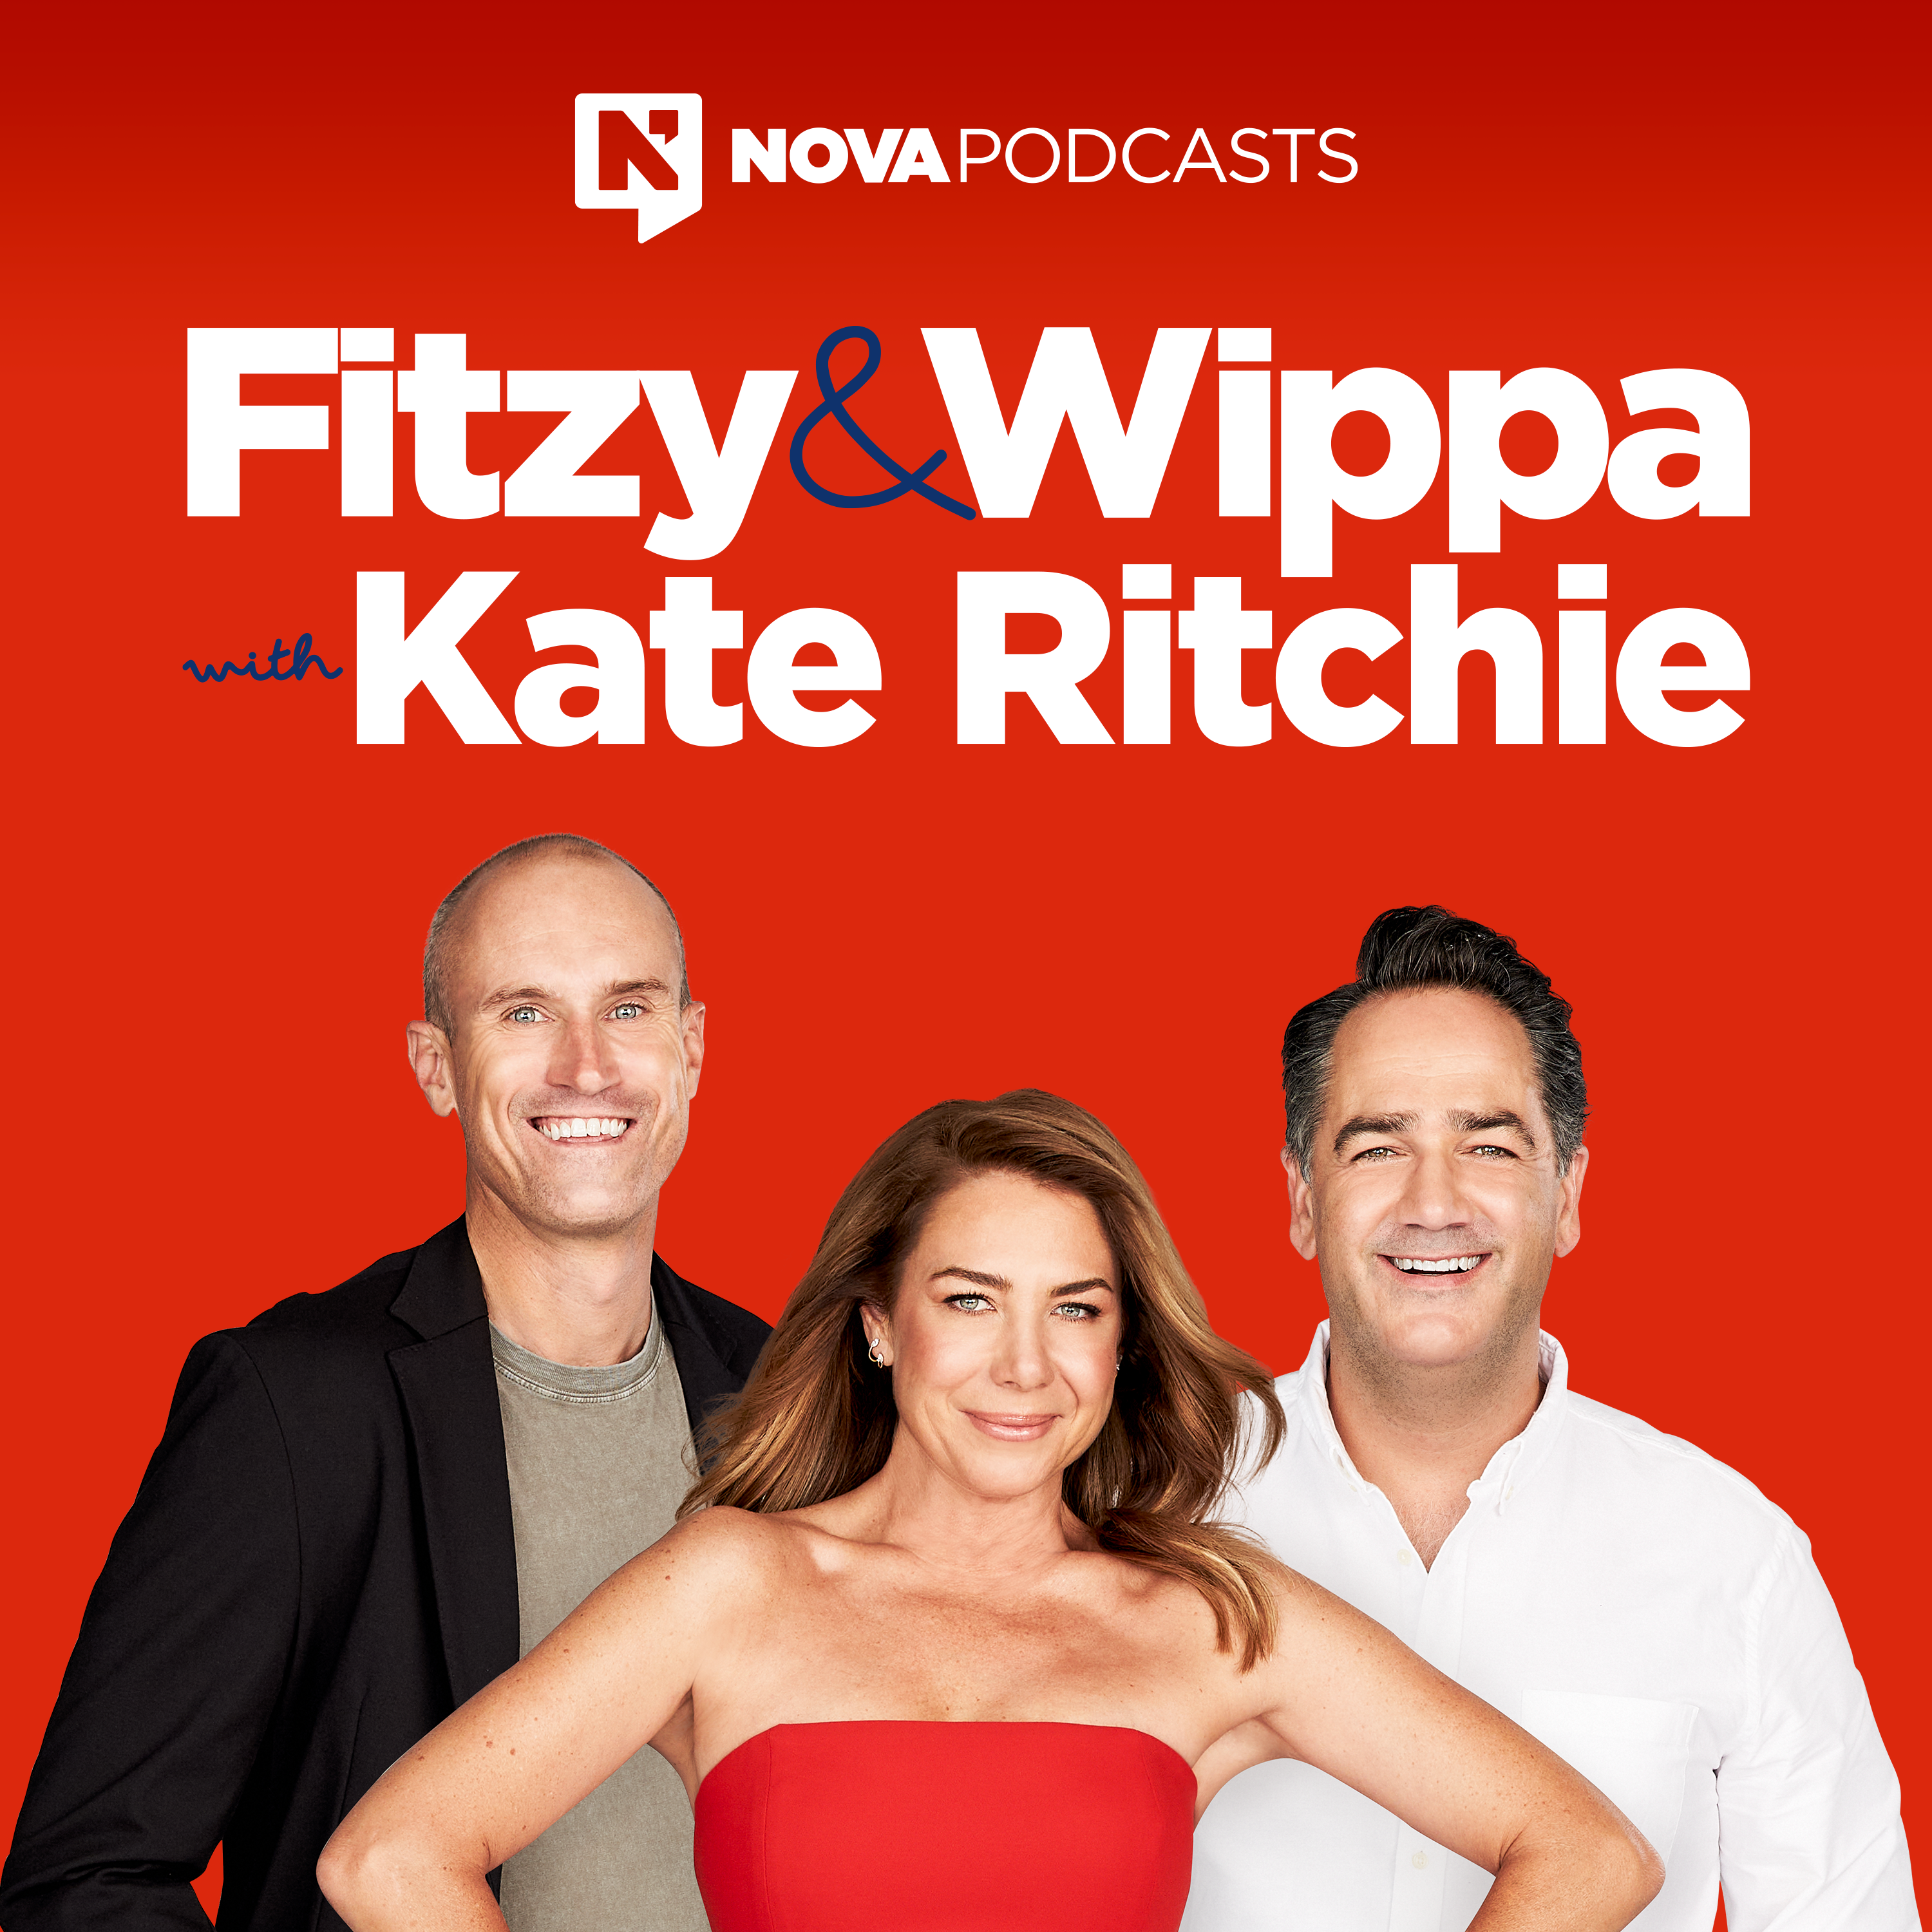 BONUS: Fitzy & Wippa’s Bizarre Chat With Chris Pine And Zachary Quinto